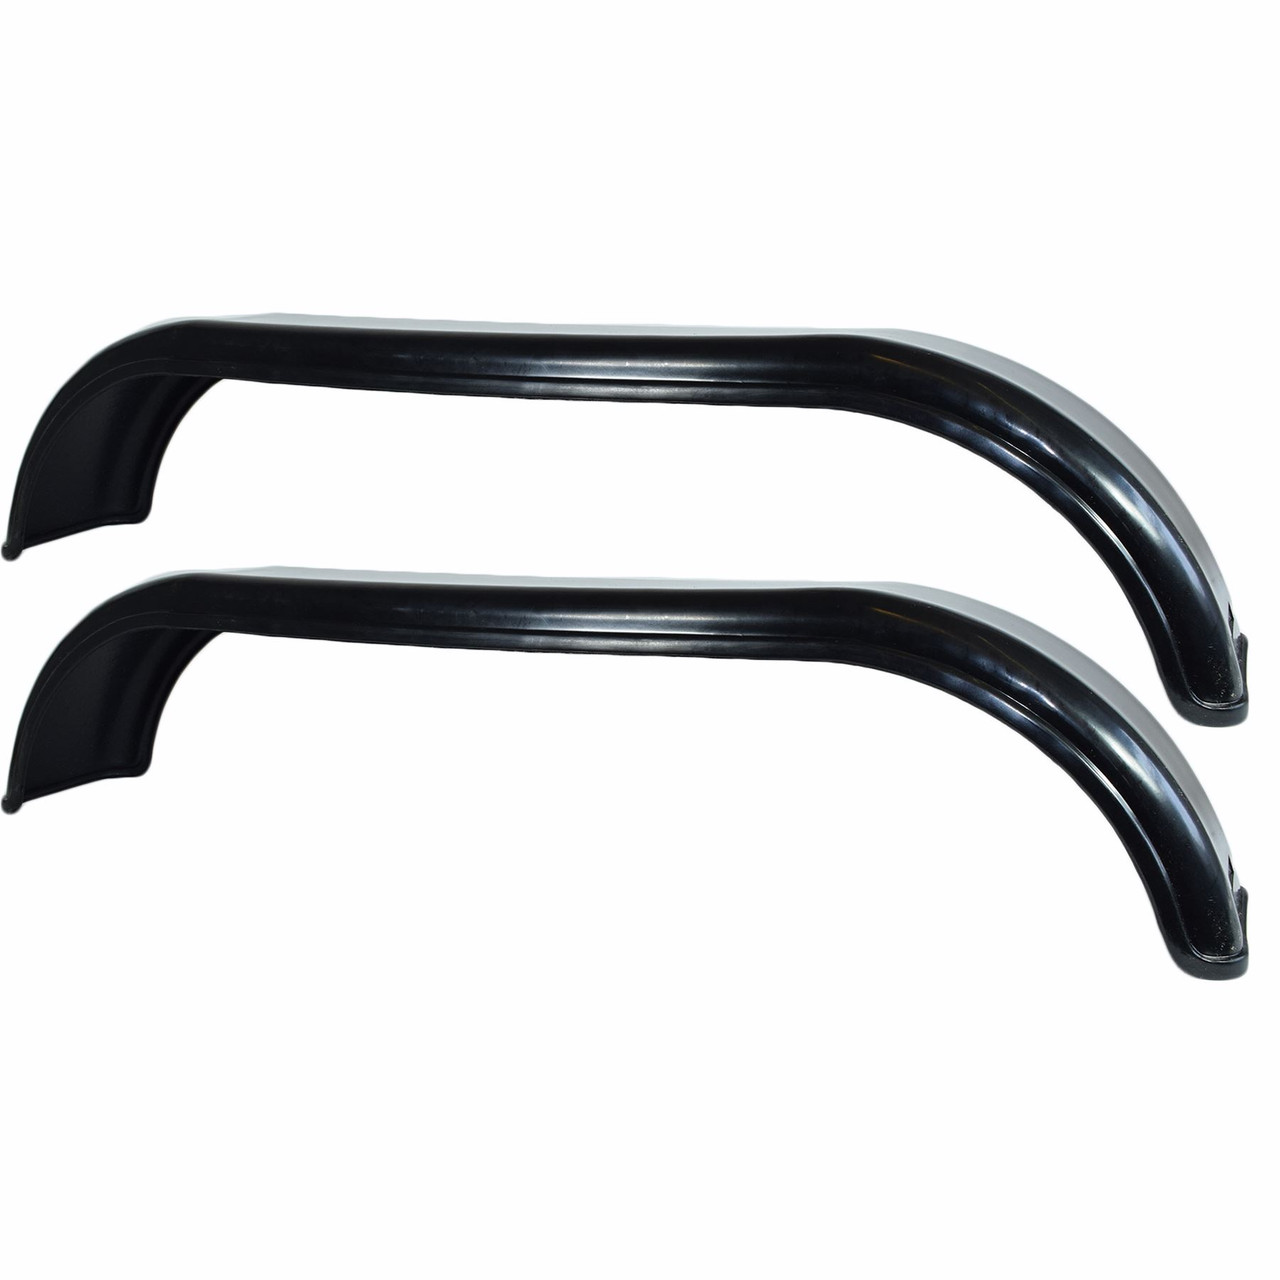 Trailer Twin Axle Tandem Mudguard Wing Fender For 10" Wheels 48" x 7" Pair